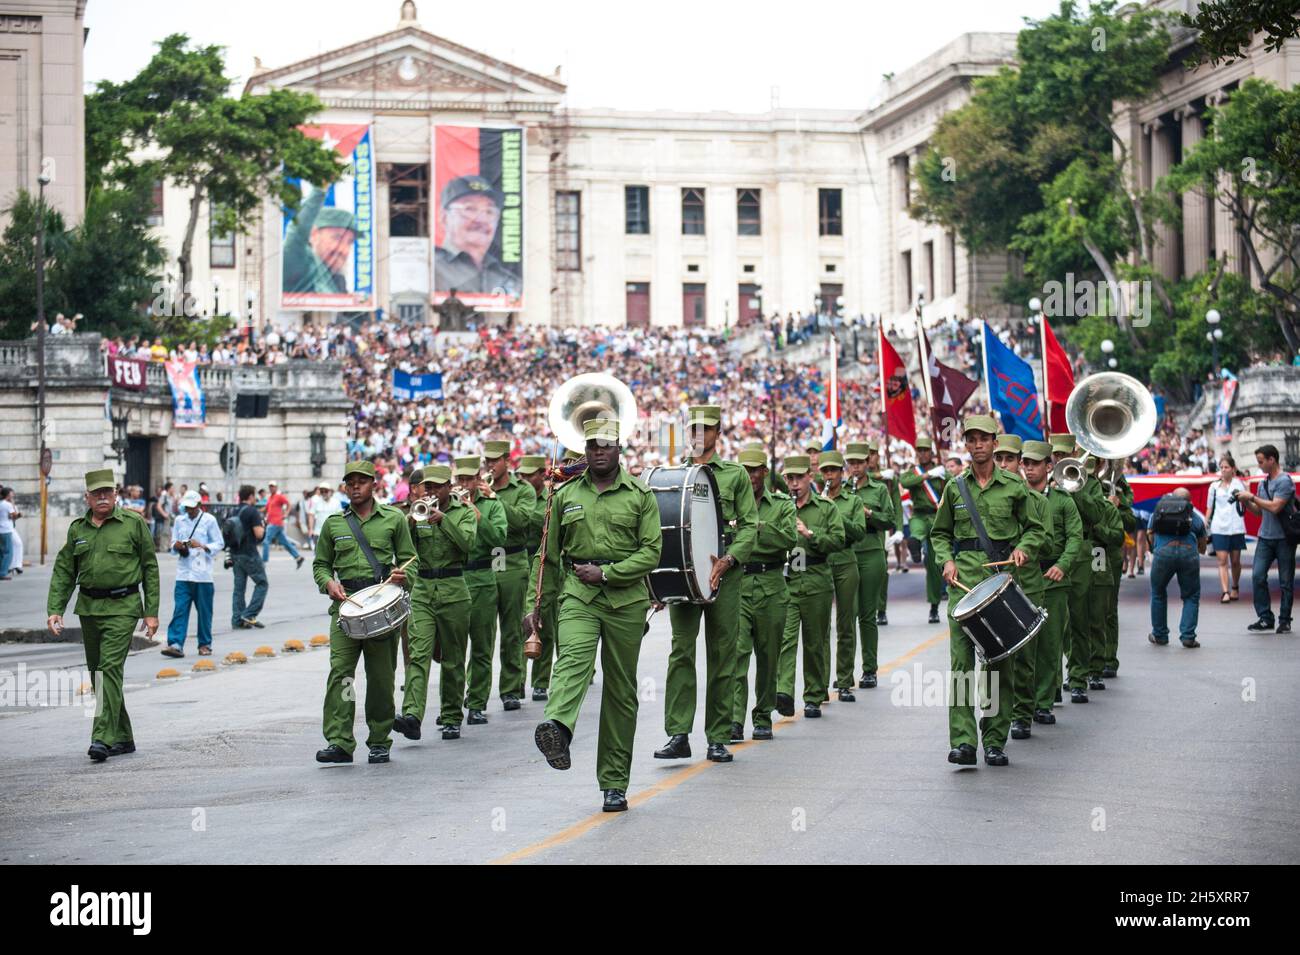 Cuban Drum Major leads band playing at an event in front of photos of  Fidel Castro and Raul Castro at the University of Havana, in Havana, Cuba. Stock Photo